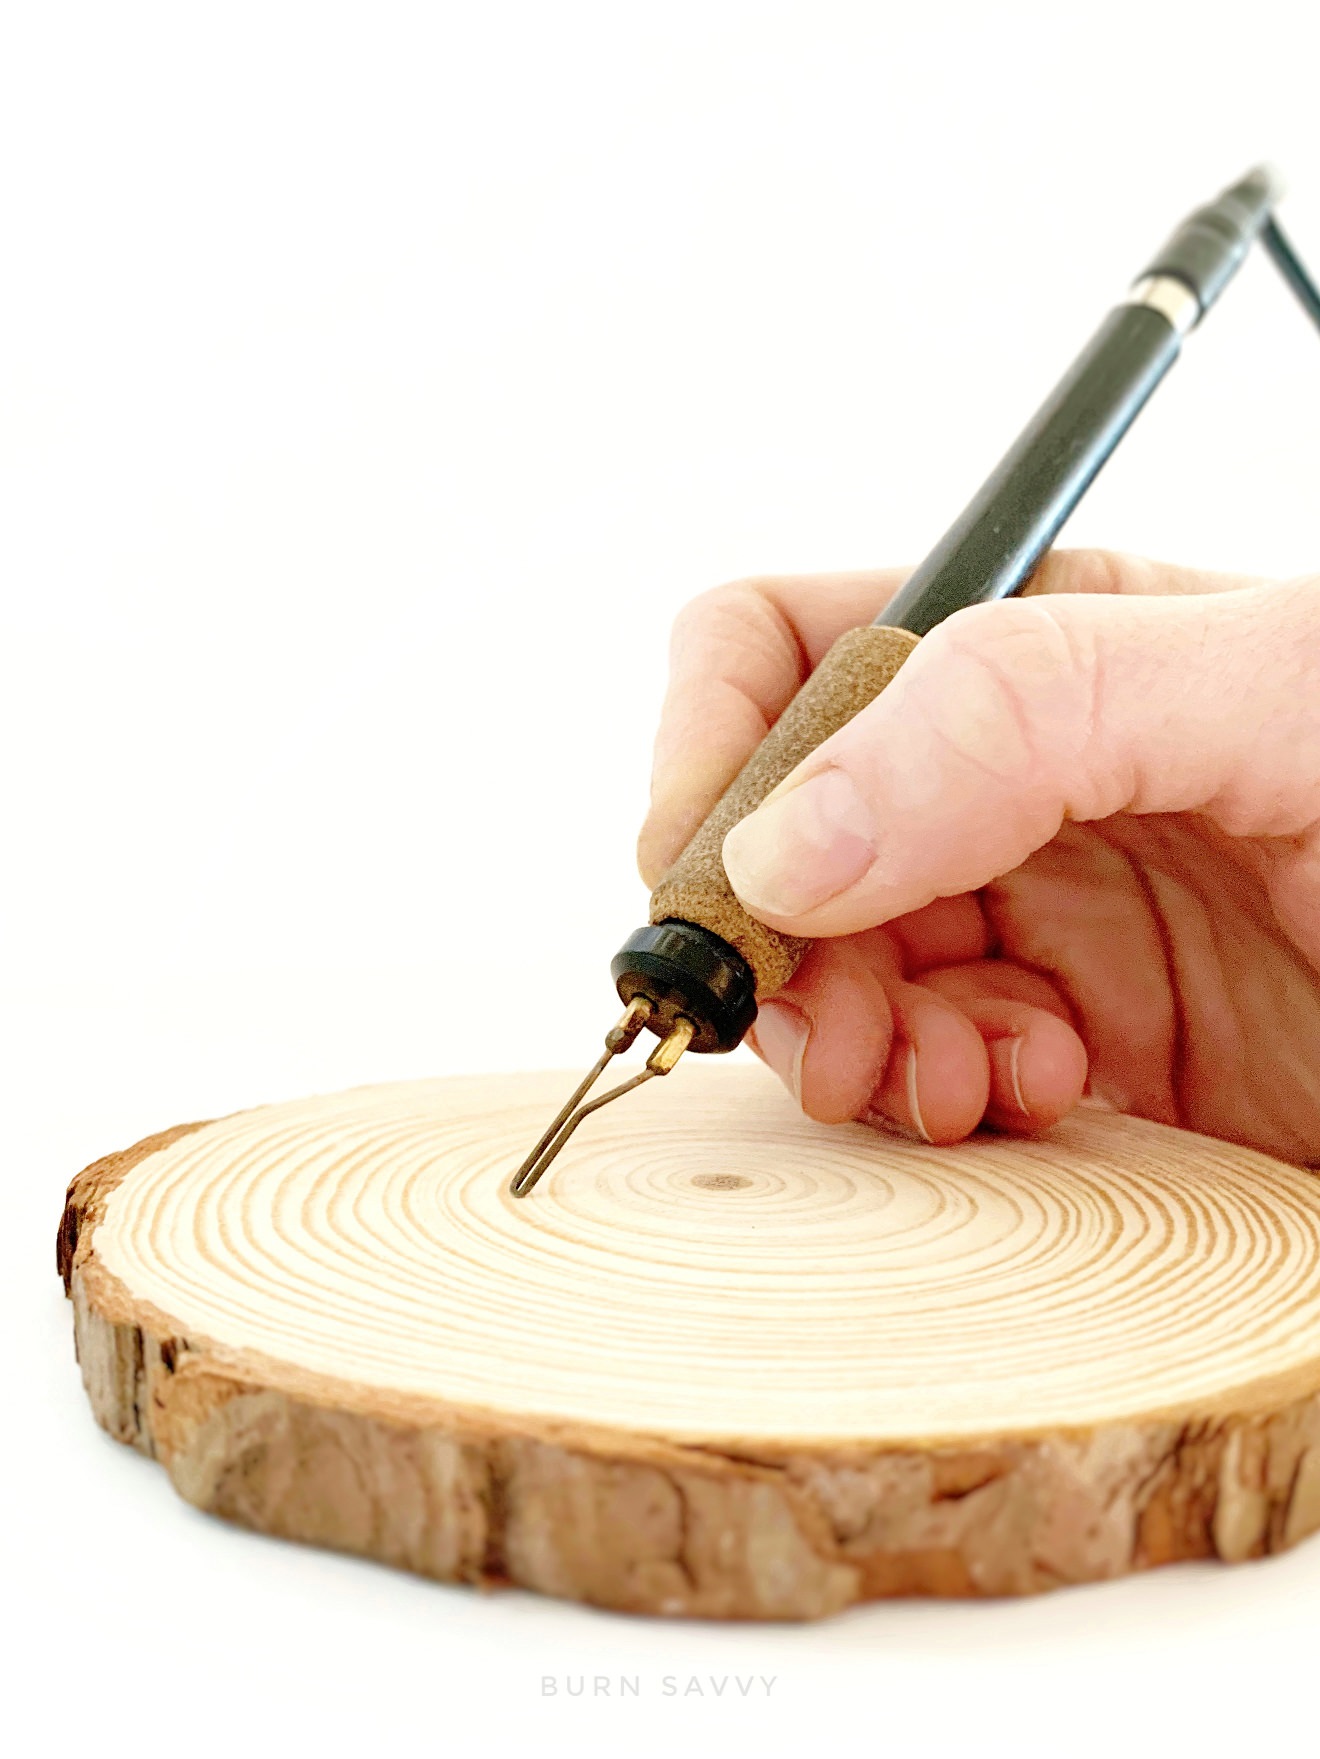 Wood Burning Pen Set Scorch Marker for DIY Wood Painting,Suitable for  Artists and Beginners in DIY Wood Projects.